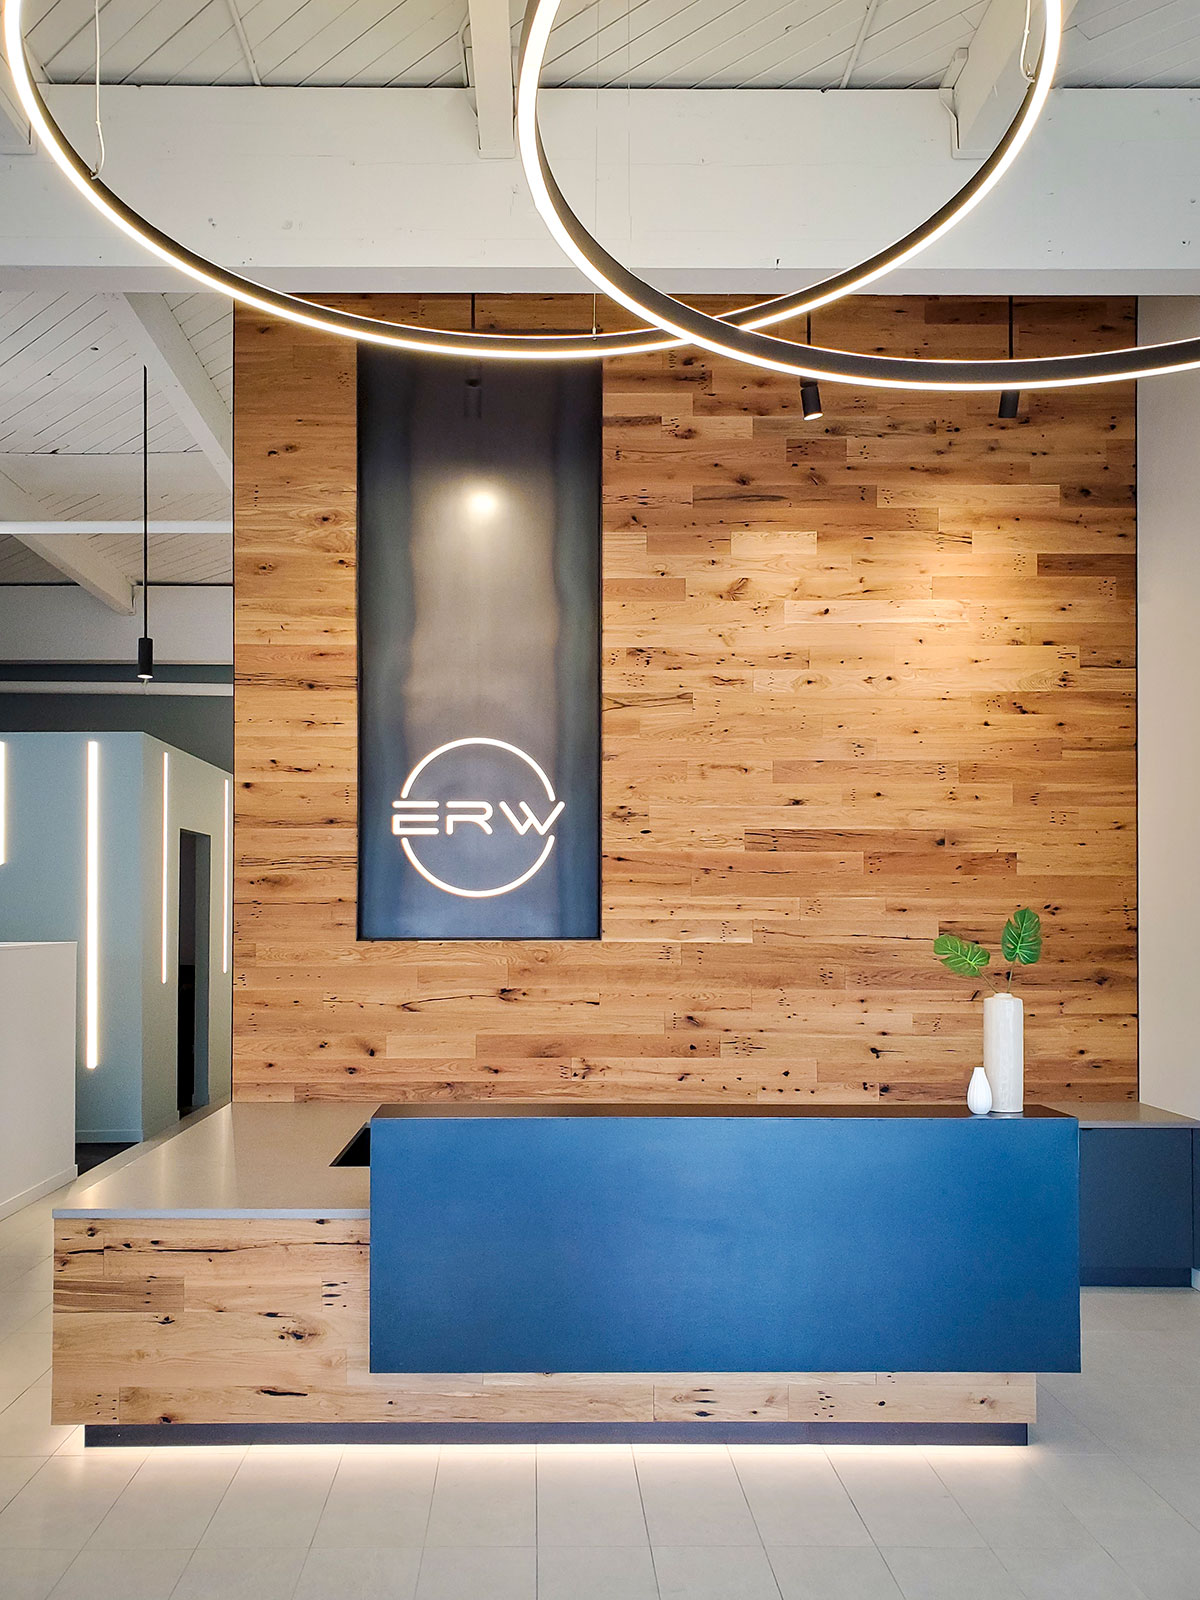 Photo of reception desk at the ERW showroom